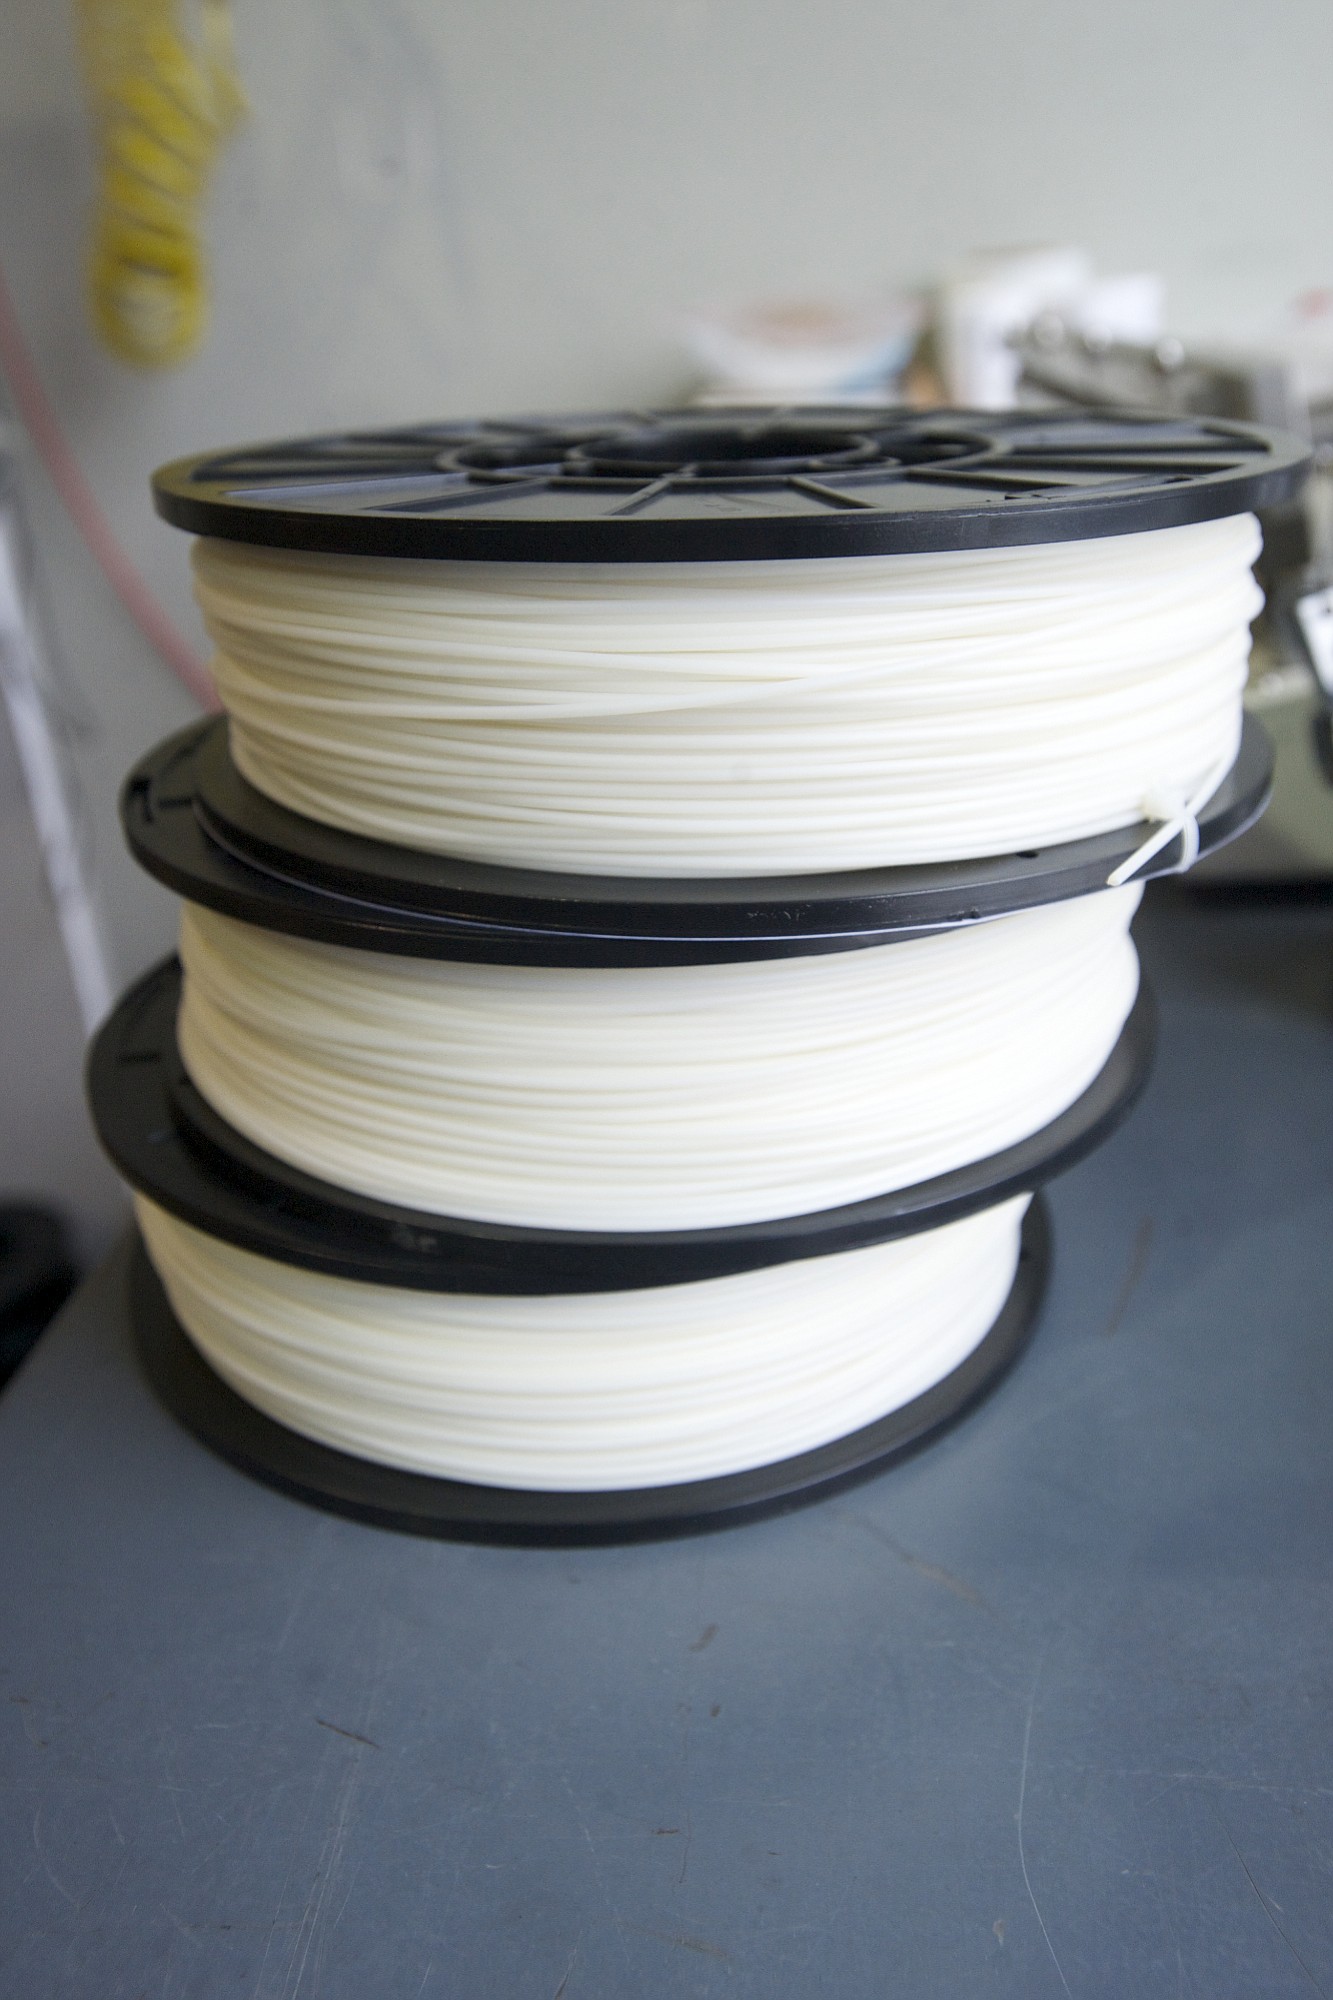 ProtoPasta is a 3-D printing filament used in 3-D printers.